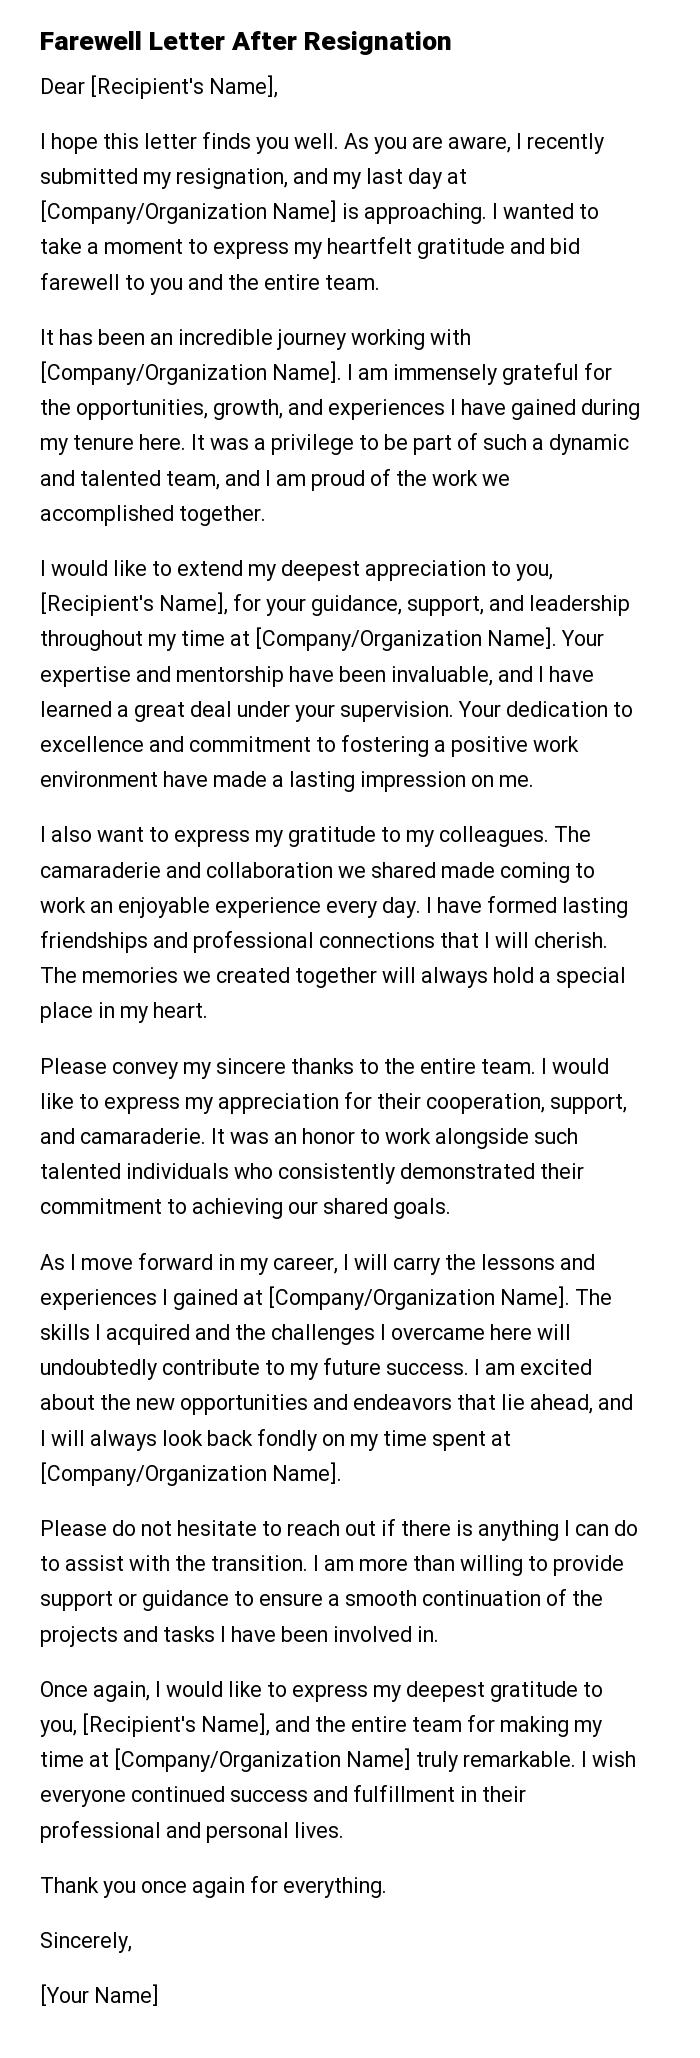 Farewell Letter After Resignation